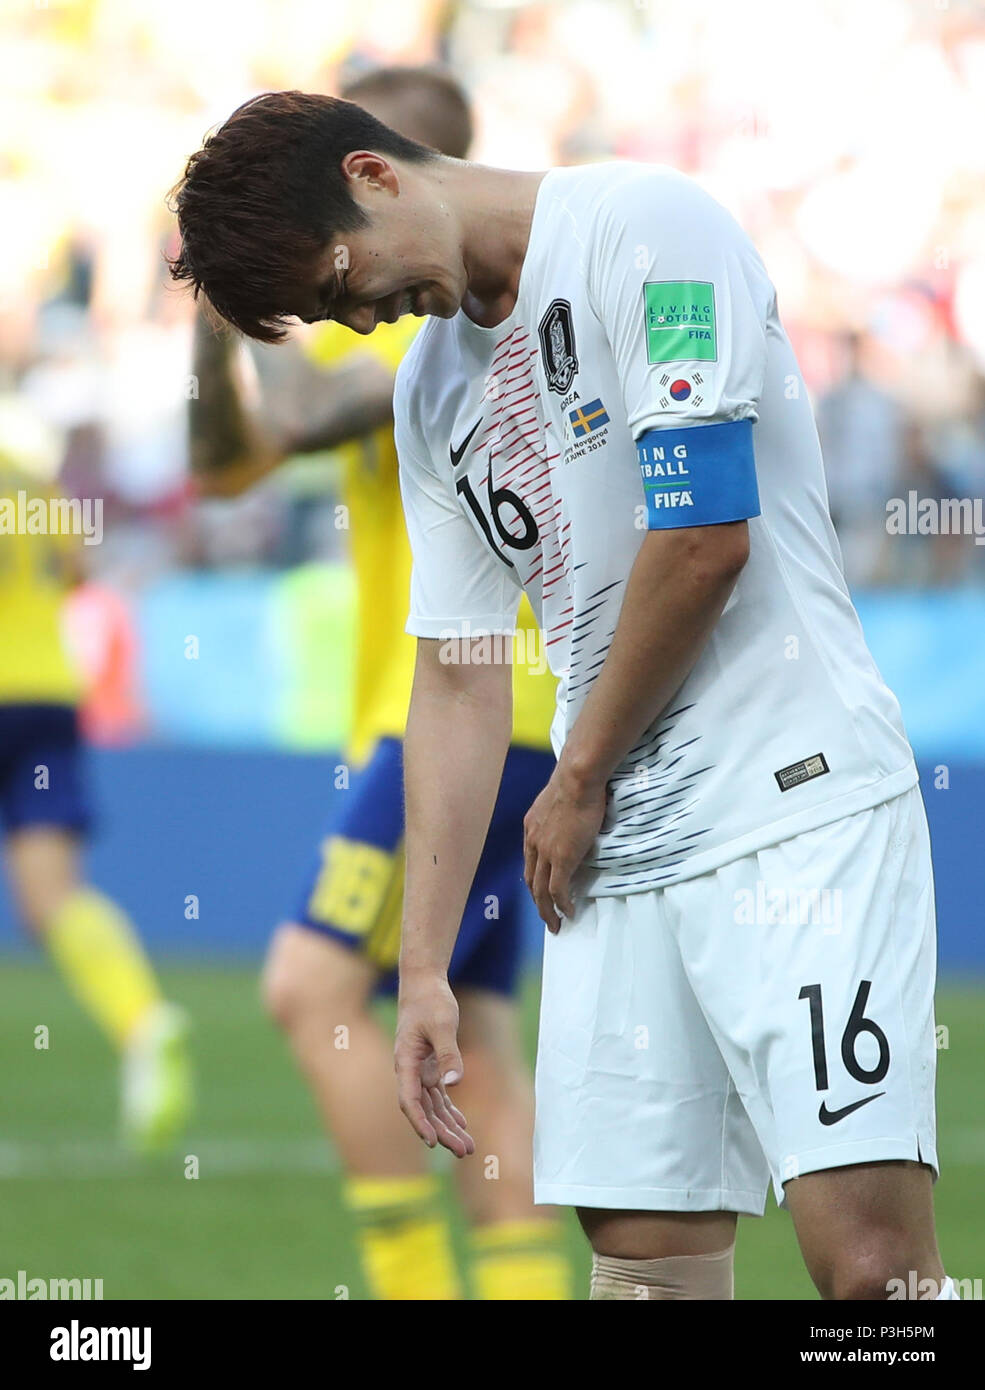 Nizhny Novgorod, Russia. 18th June, 2018. Ki Sungyueng of South Korea reacts during a group F match between Sweden and South Korea at the 2018 FIFA World Cup in Nizhny Novgorod, Russia, June 18, 2018. Sweden won 1-0. Credit: Wu Zhuang/Xinhua/Alamy Live News Stock Photo